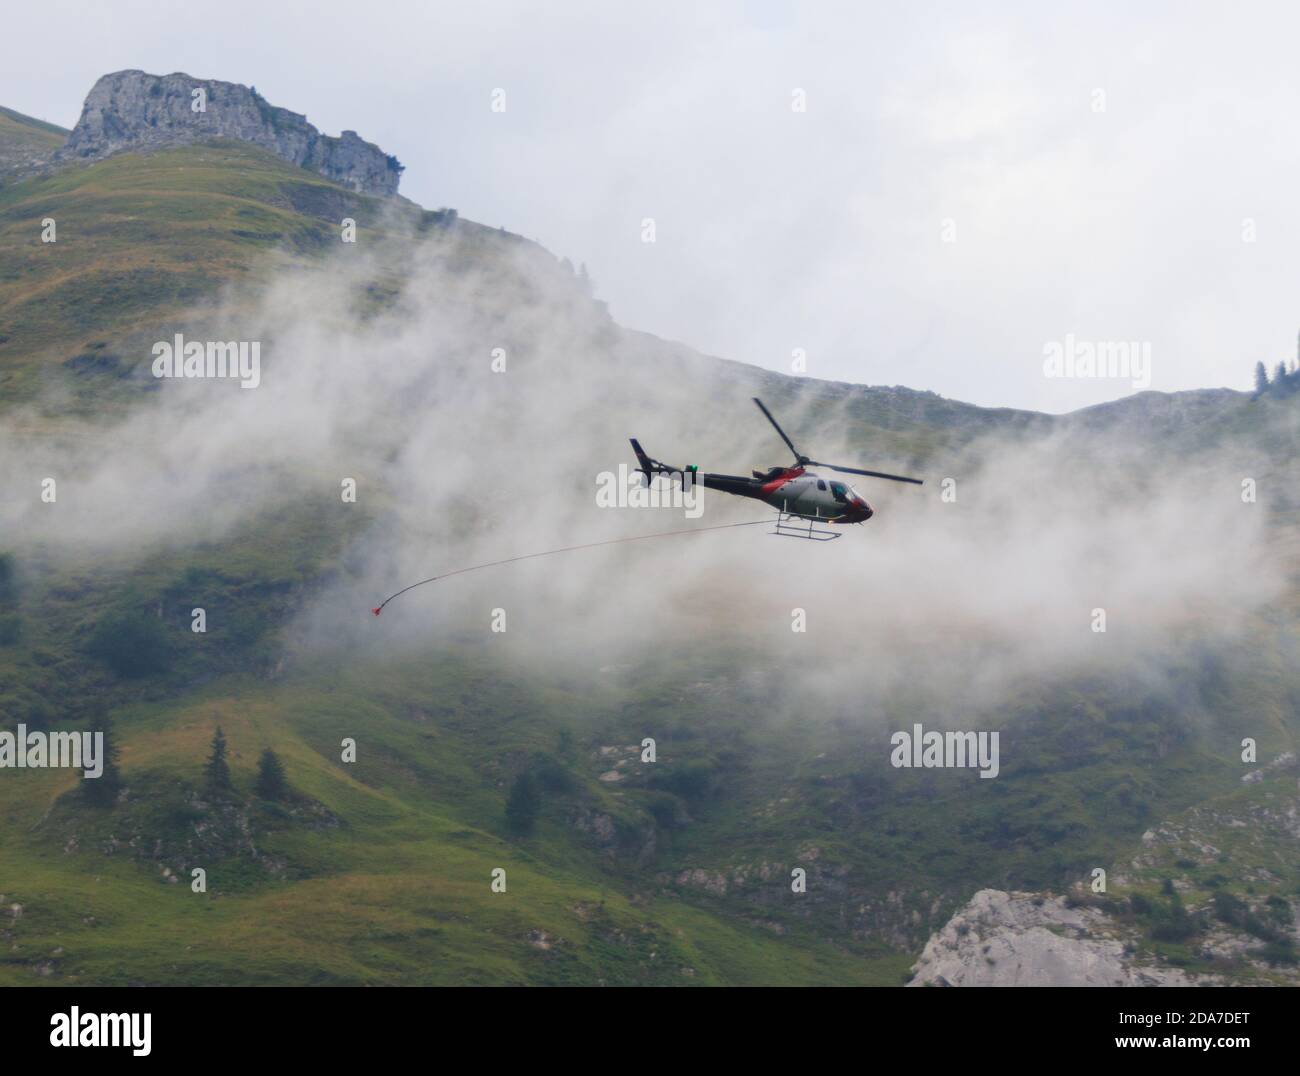 Helicopter during flight Stock Photo